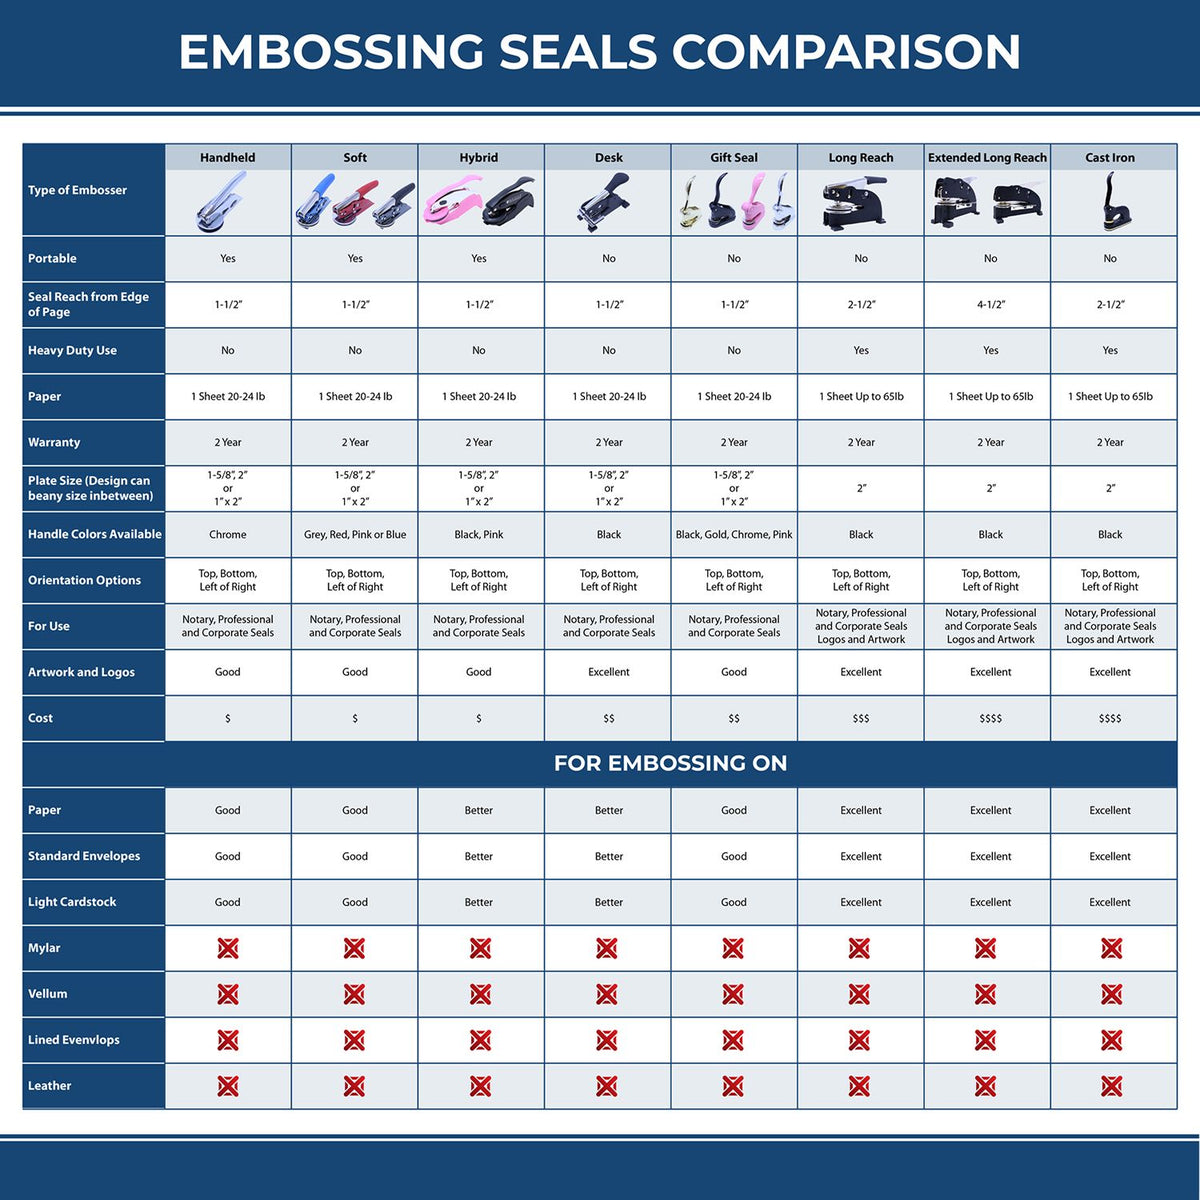 A comparison chart for the different types of mount models available for the Handheld Georgia Land Surveyor Seal.